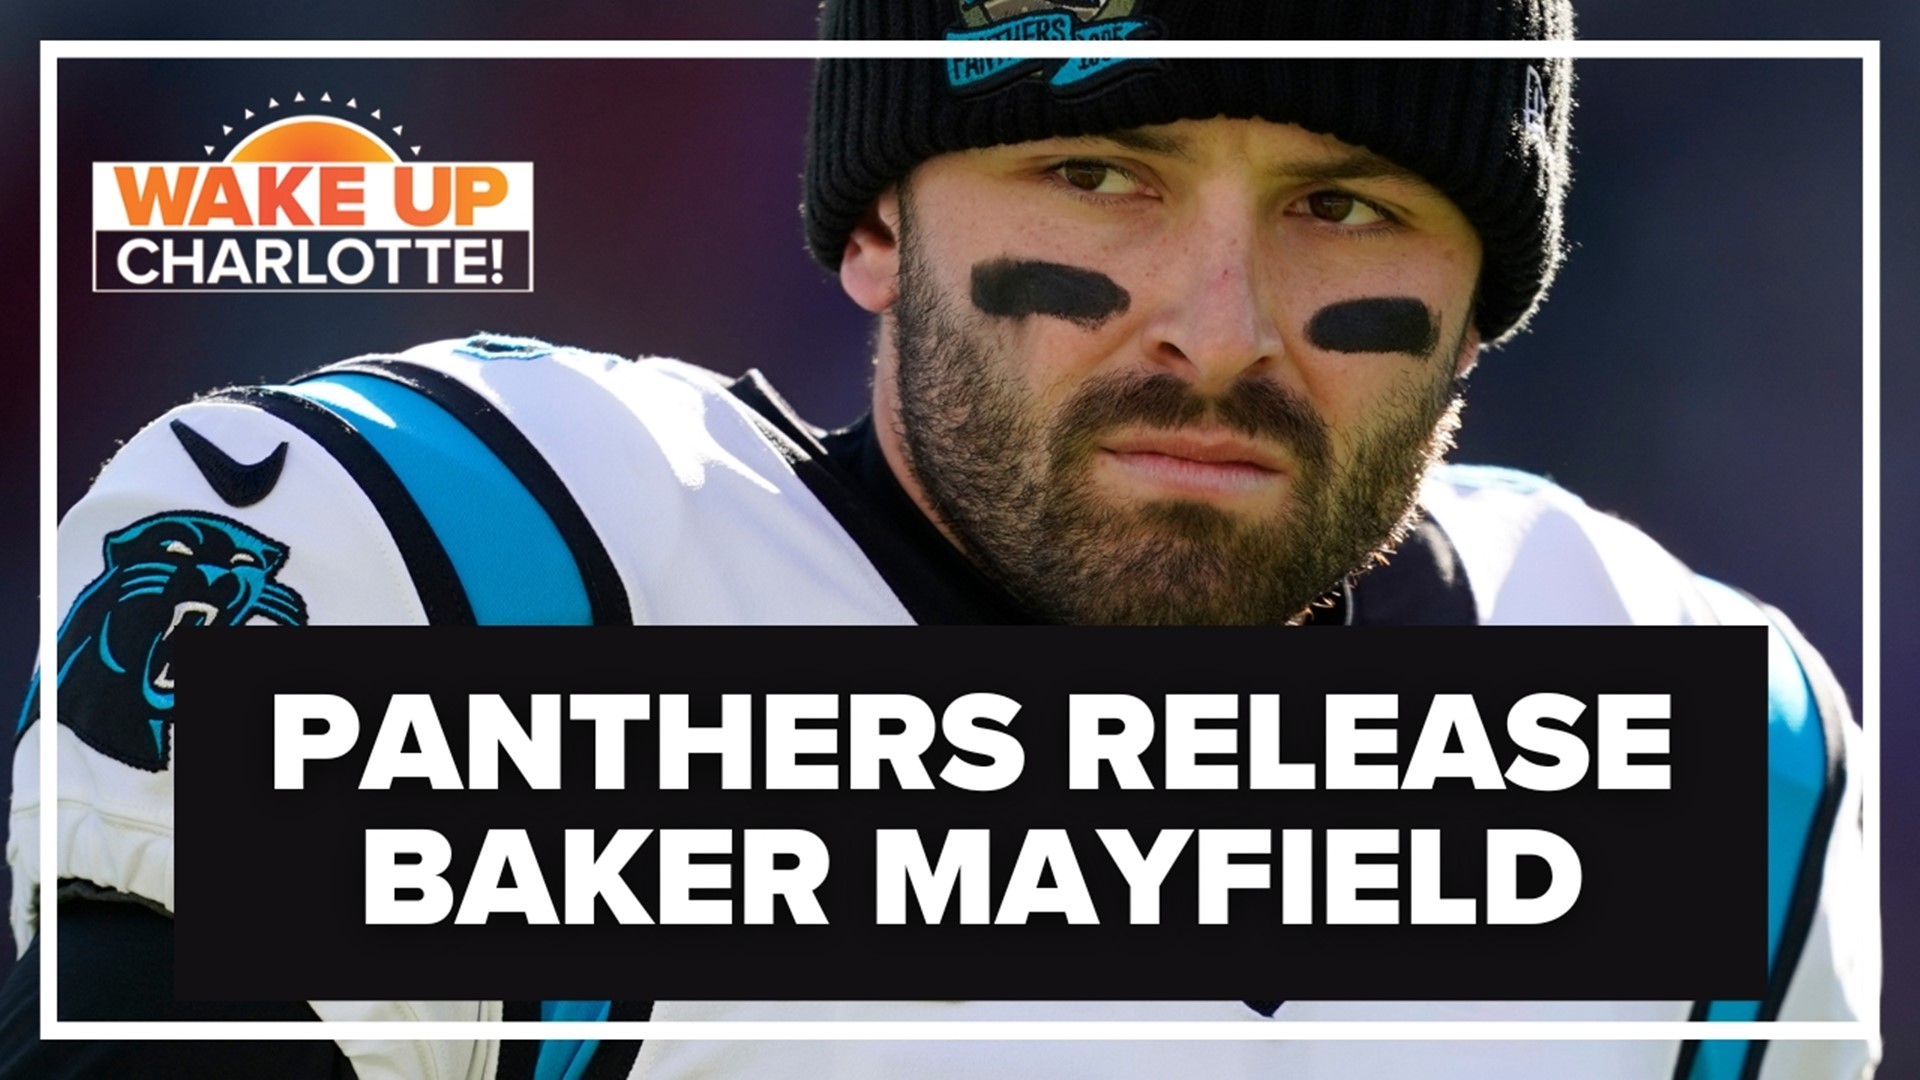 Baker Mayfield's tenure with the Panthers was marred by poor play and the firing of Matt Rhule.